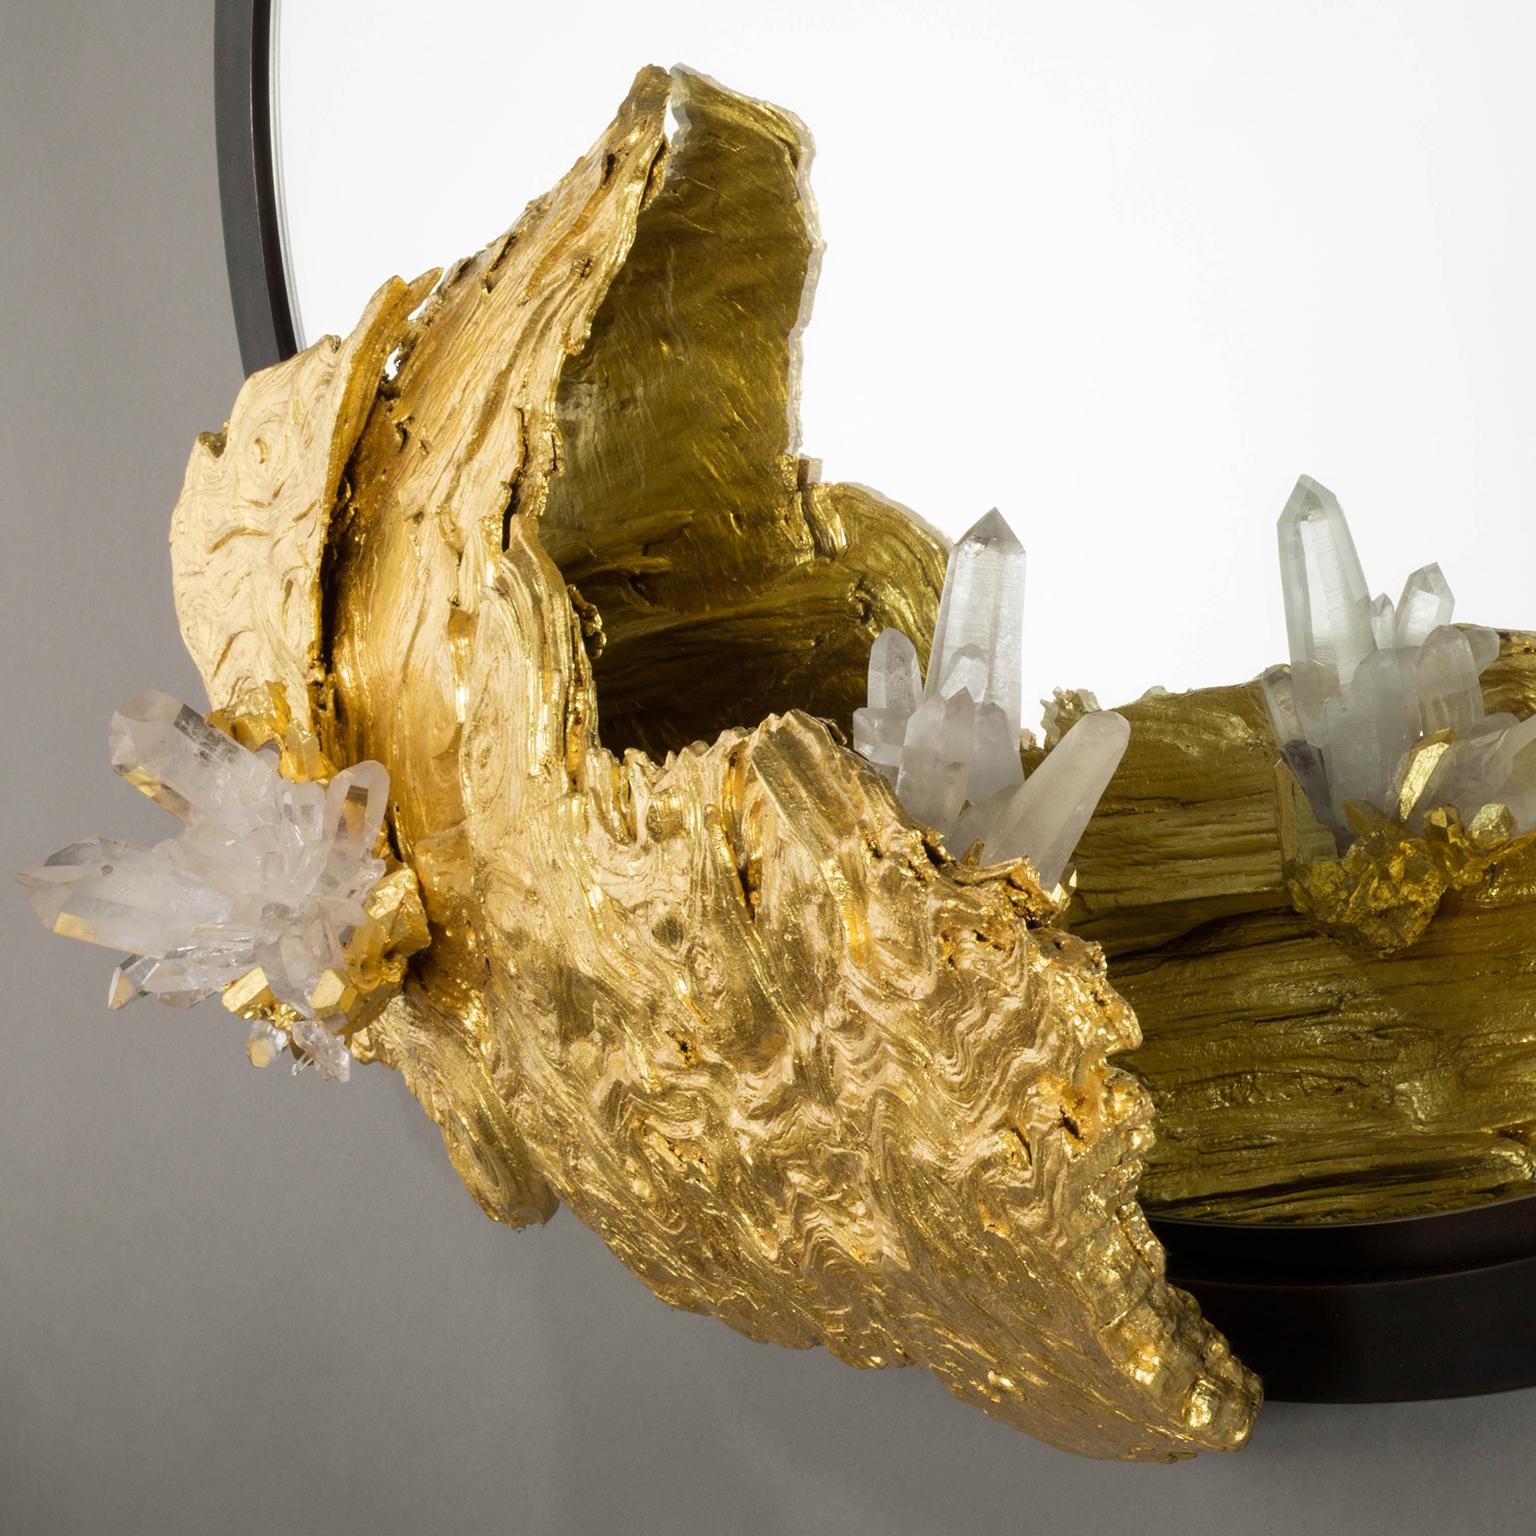 Polished Studio Greytak 'Mirror 3' With Gold Leafed Montana Pine and Colombian Crystal For Sale